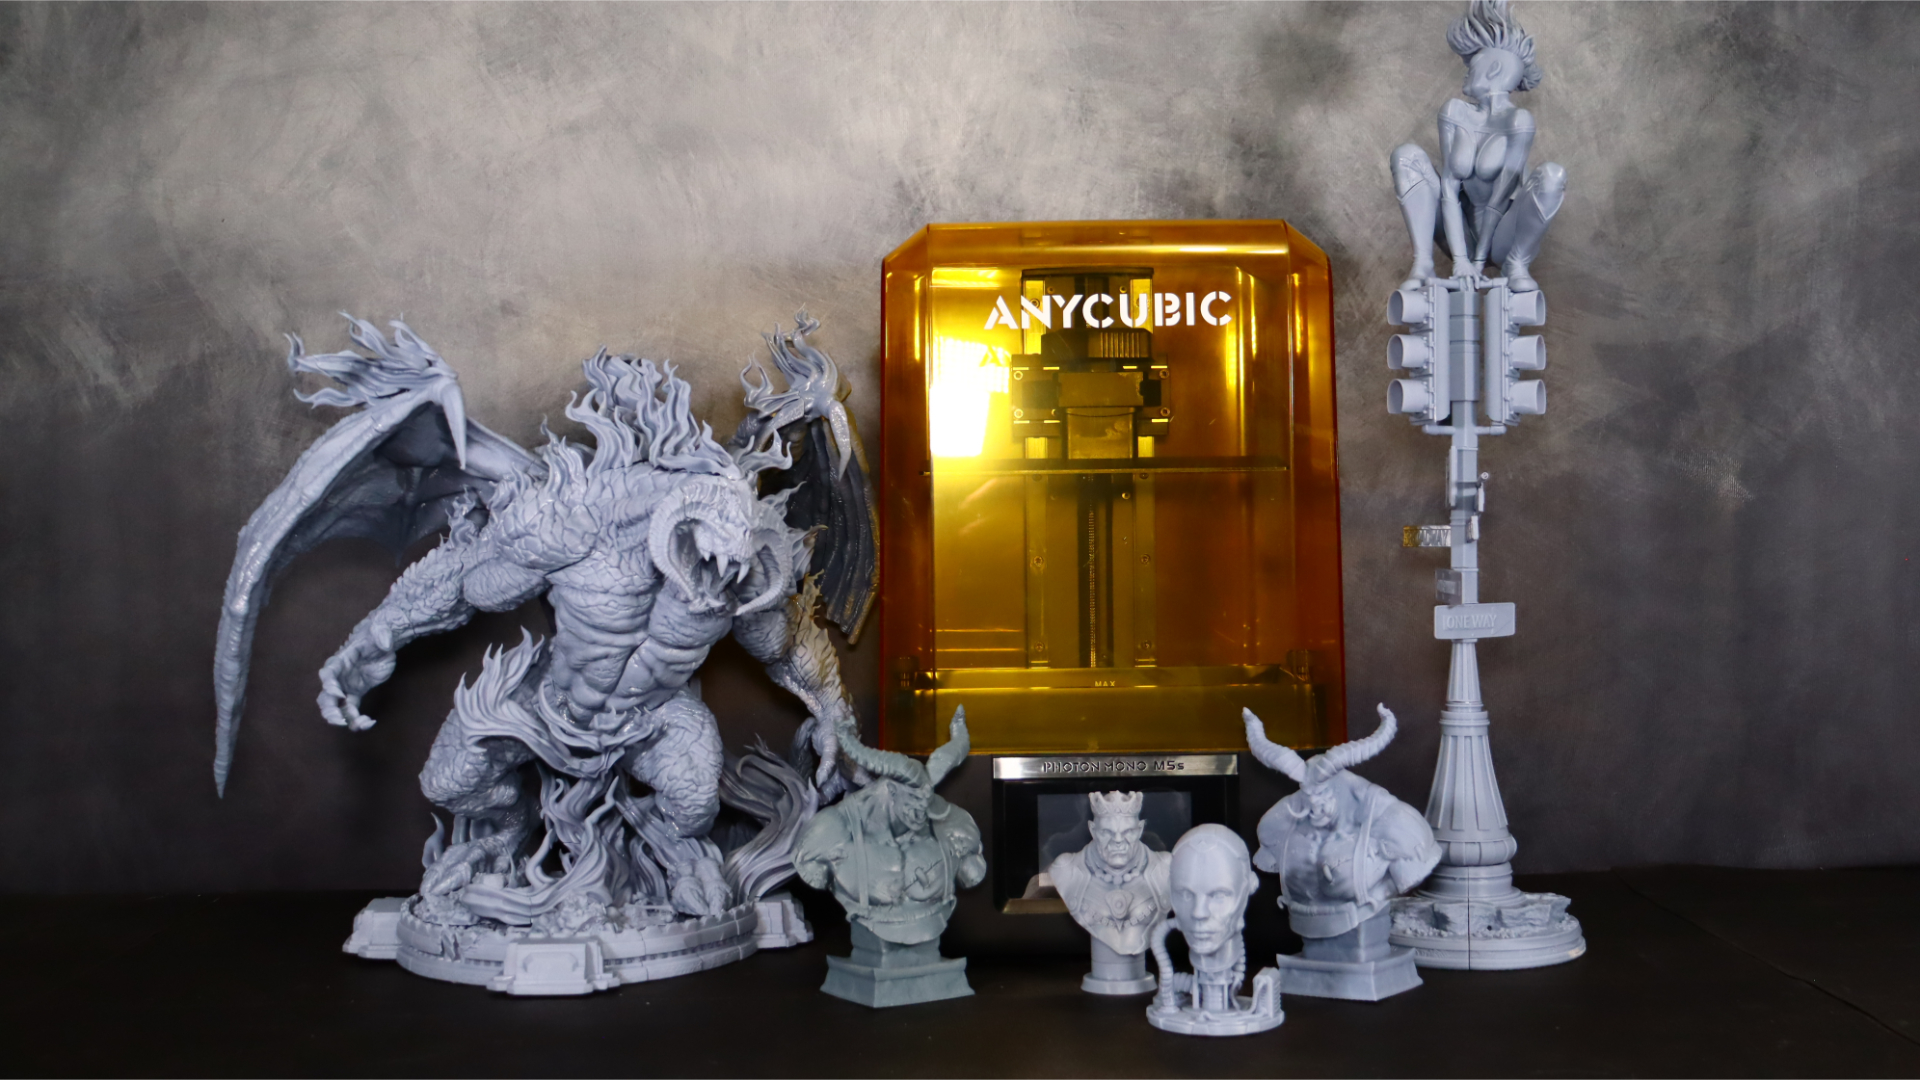 The Anycubic Photon Mono M5s and everything we printed with it.